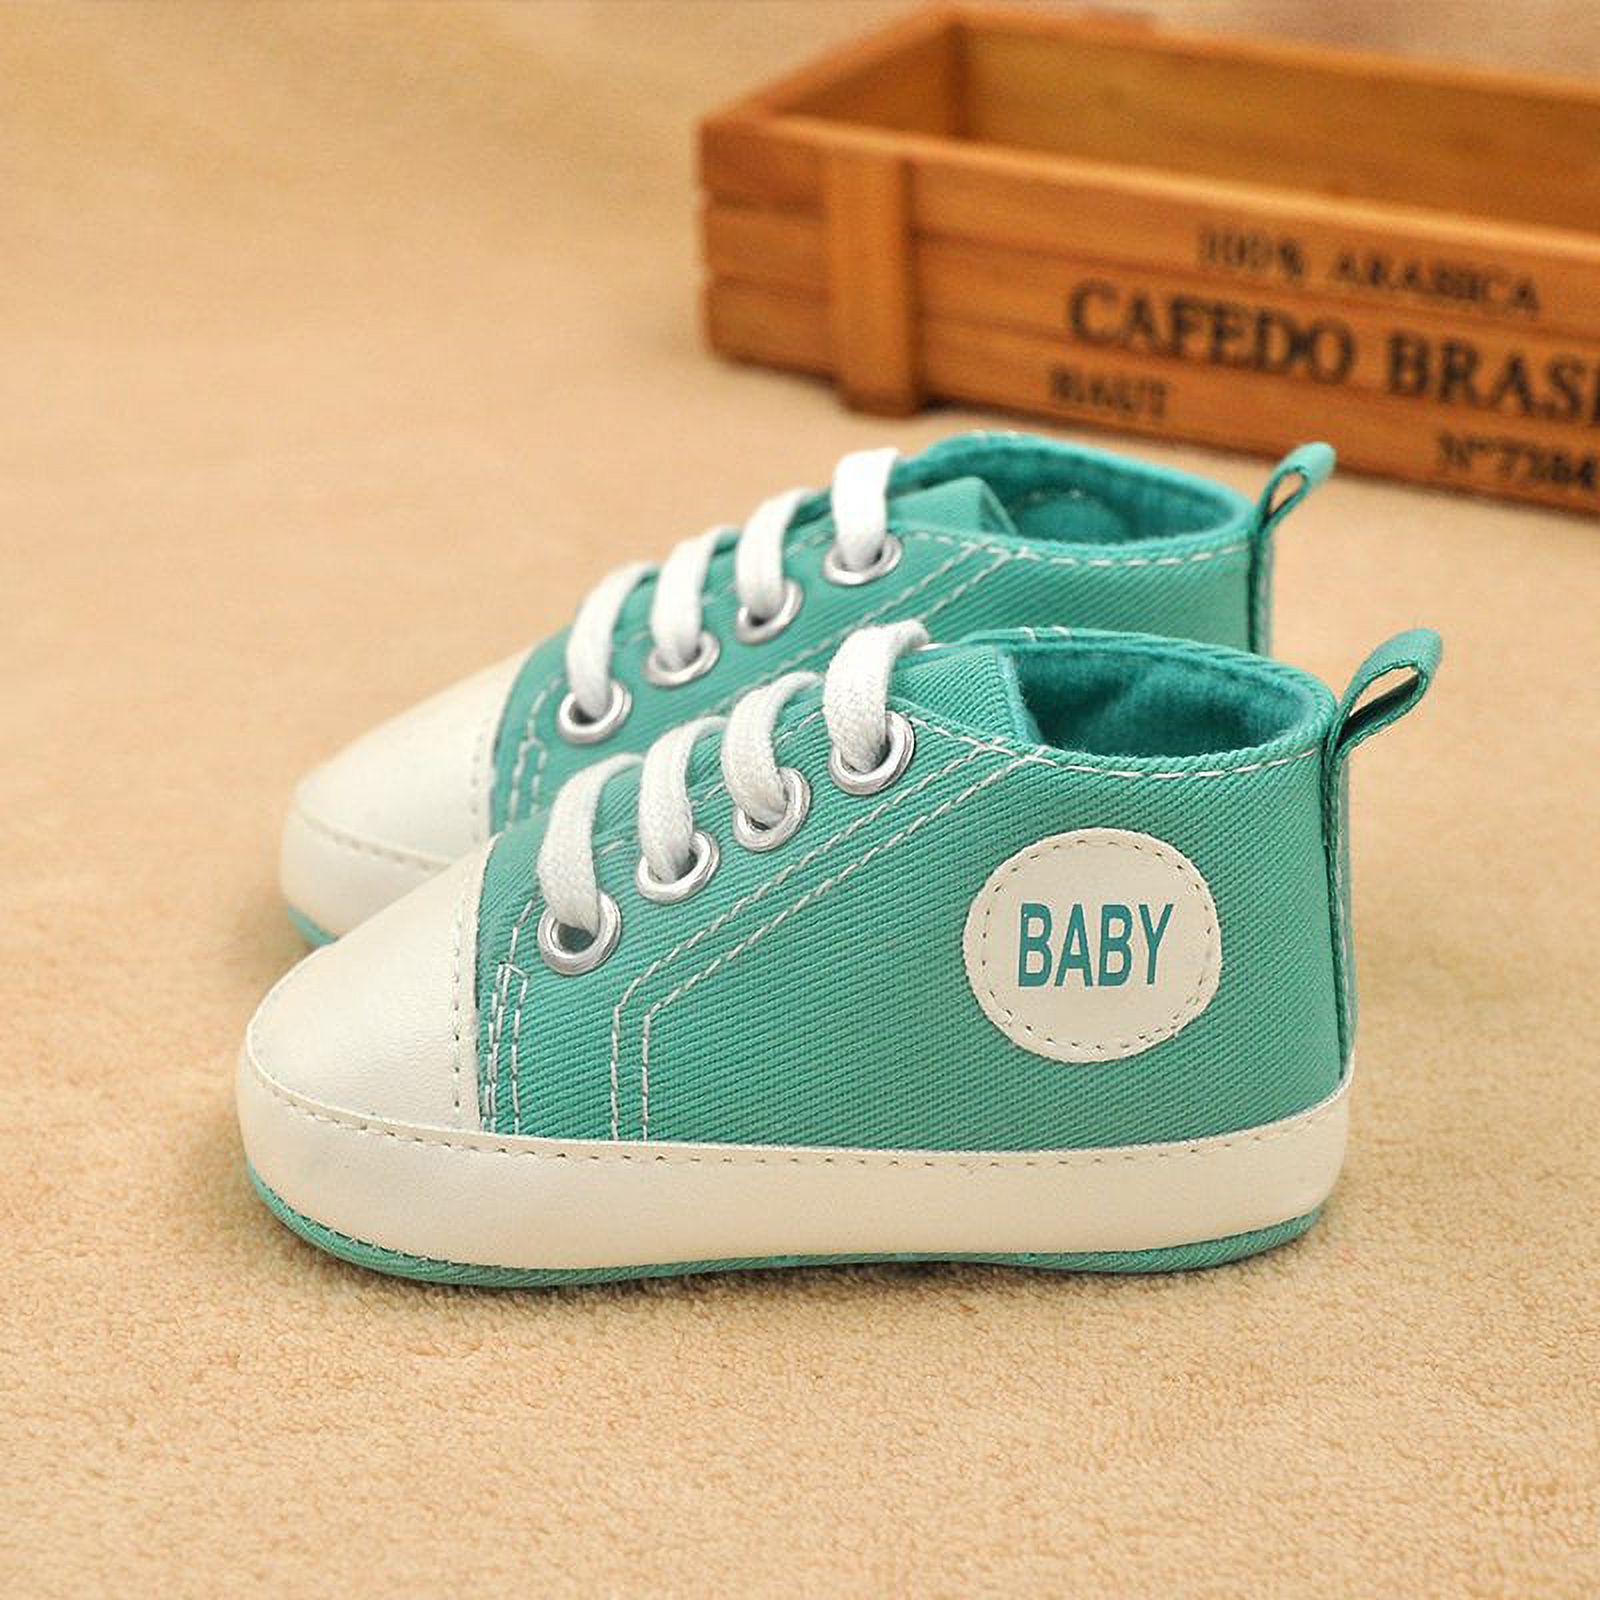 Infant Baby Girls Boys Canvas Shoes Soft Sole Toddler Slip On Newborn Crib Moccasins Casual Sneaker First Walkers Skate Shoe - image 5 of 5